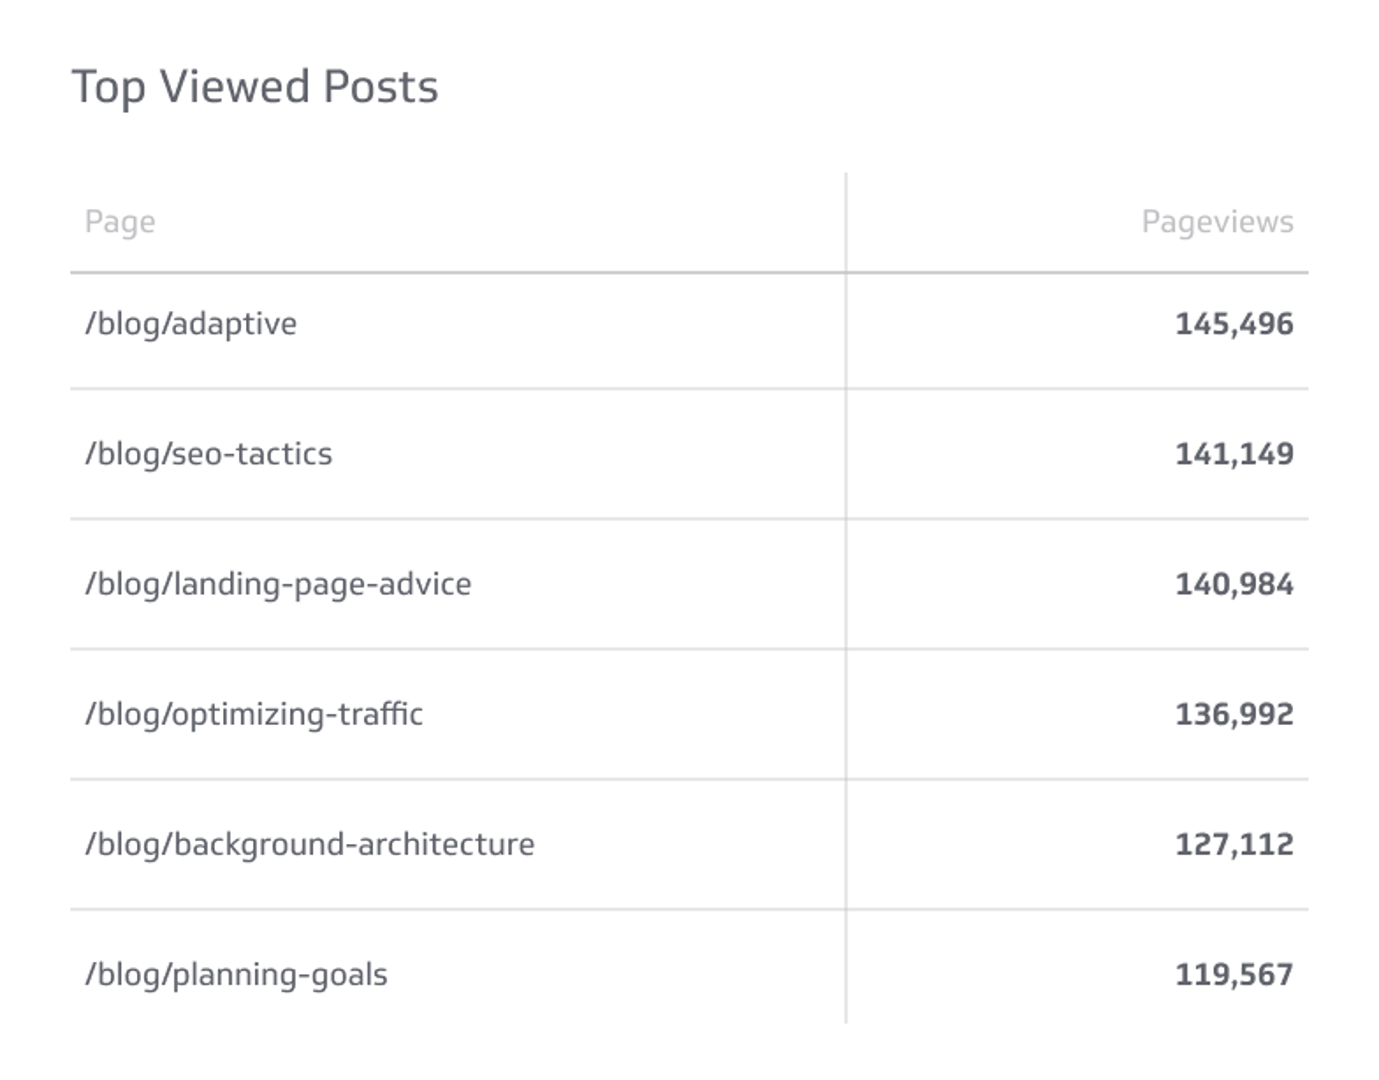 Related KPI Examples - Top Viewed Posts Metric